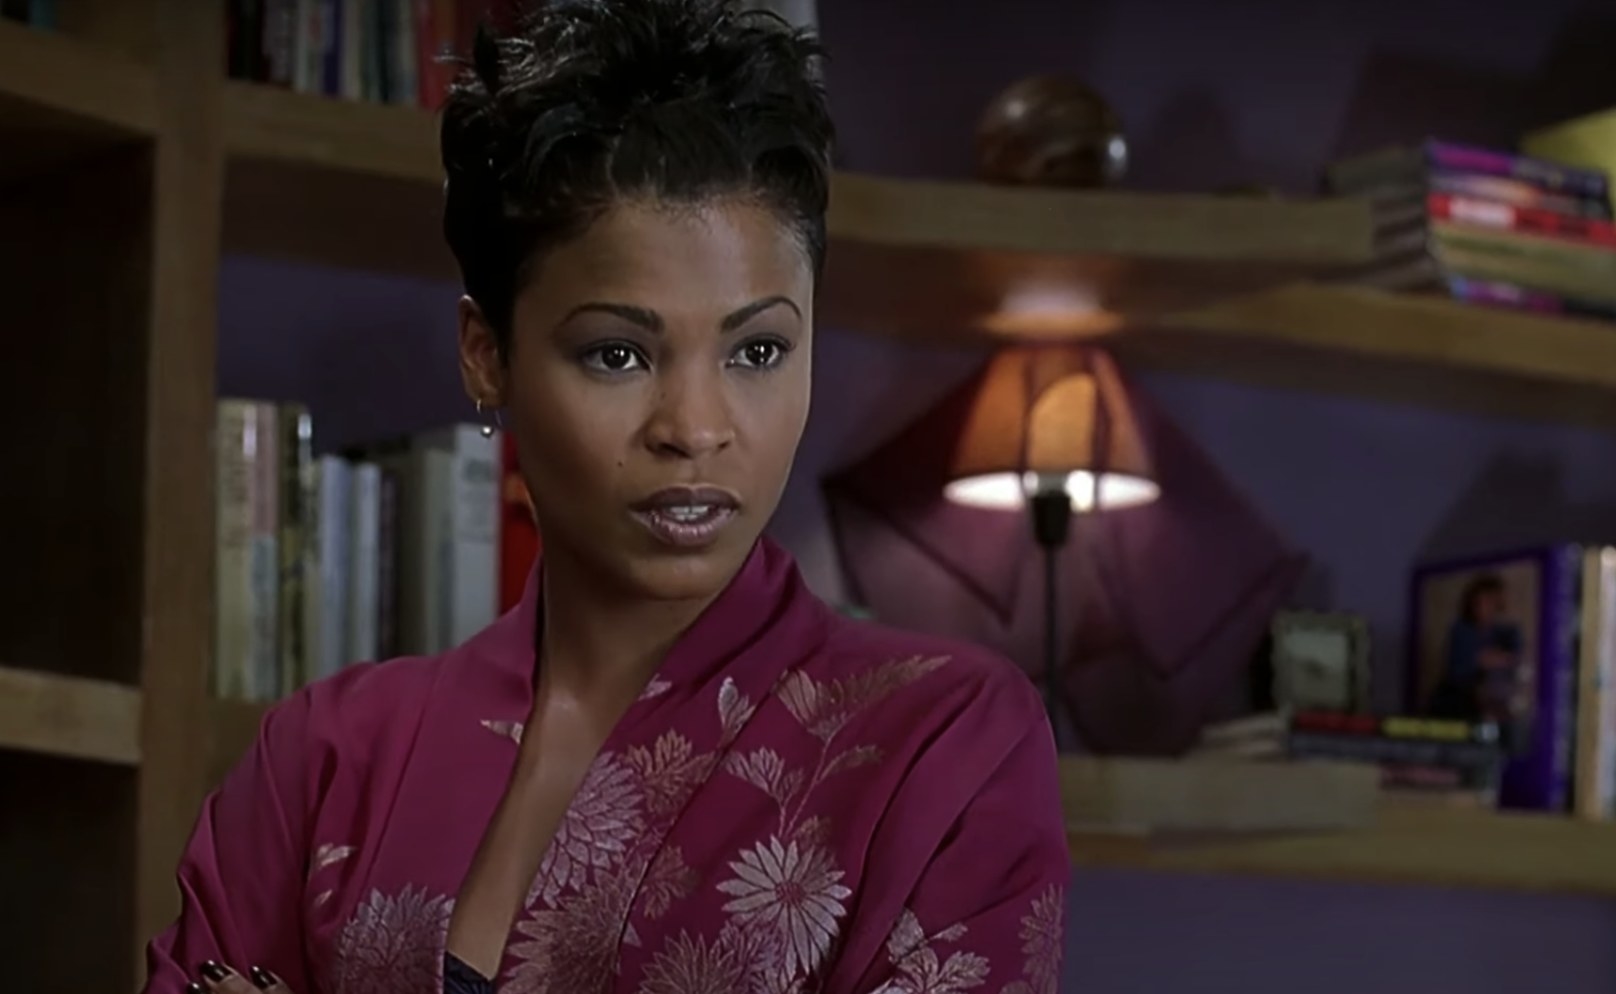 Nia Long wears a pink robe and annoyedly looks offscreen at someone.